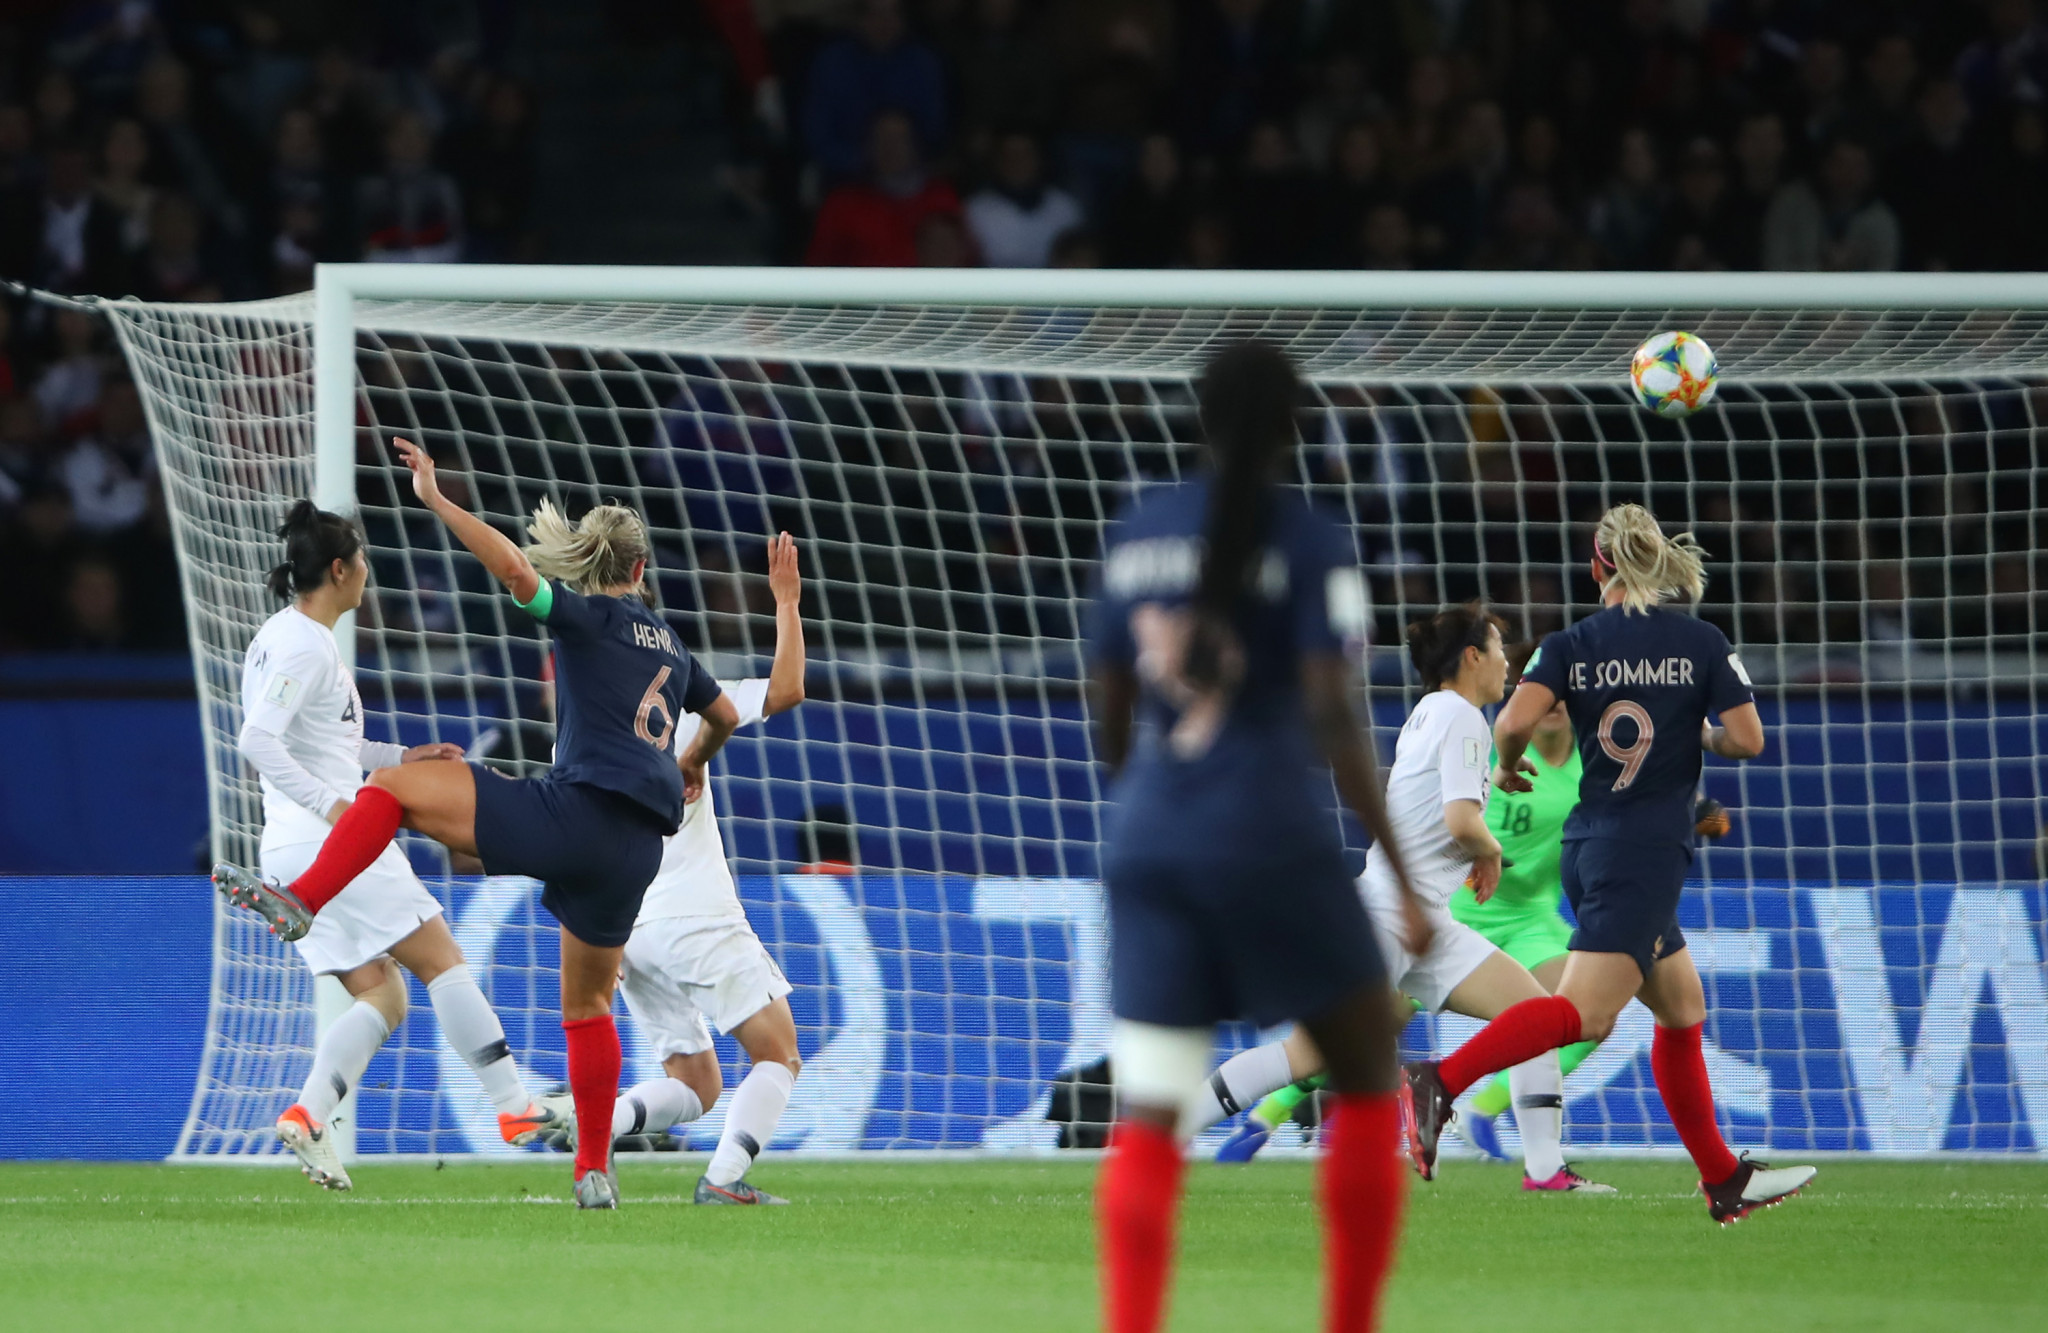 Amandine Henry was the scorer of the fourth goal in the 85th minute ©Getty Images